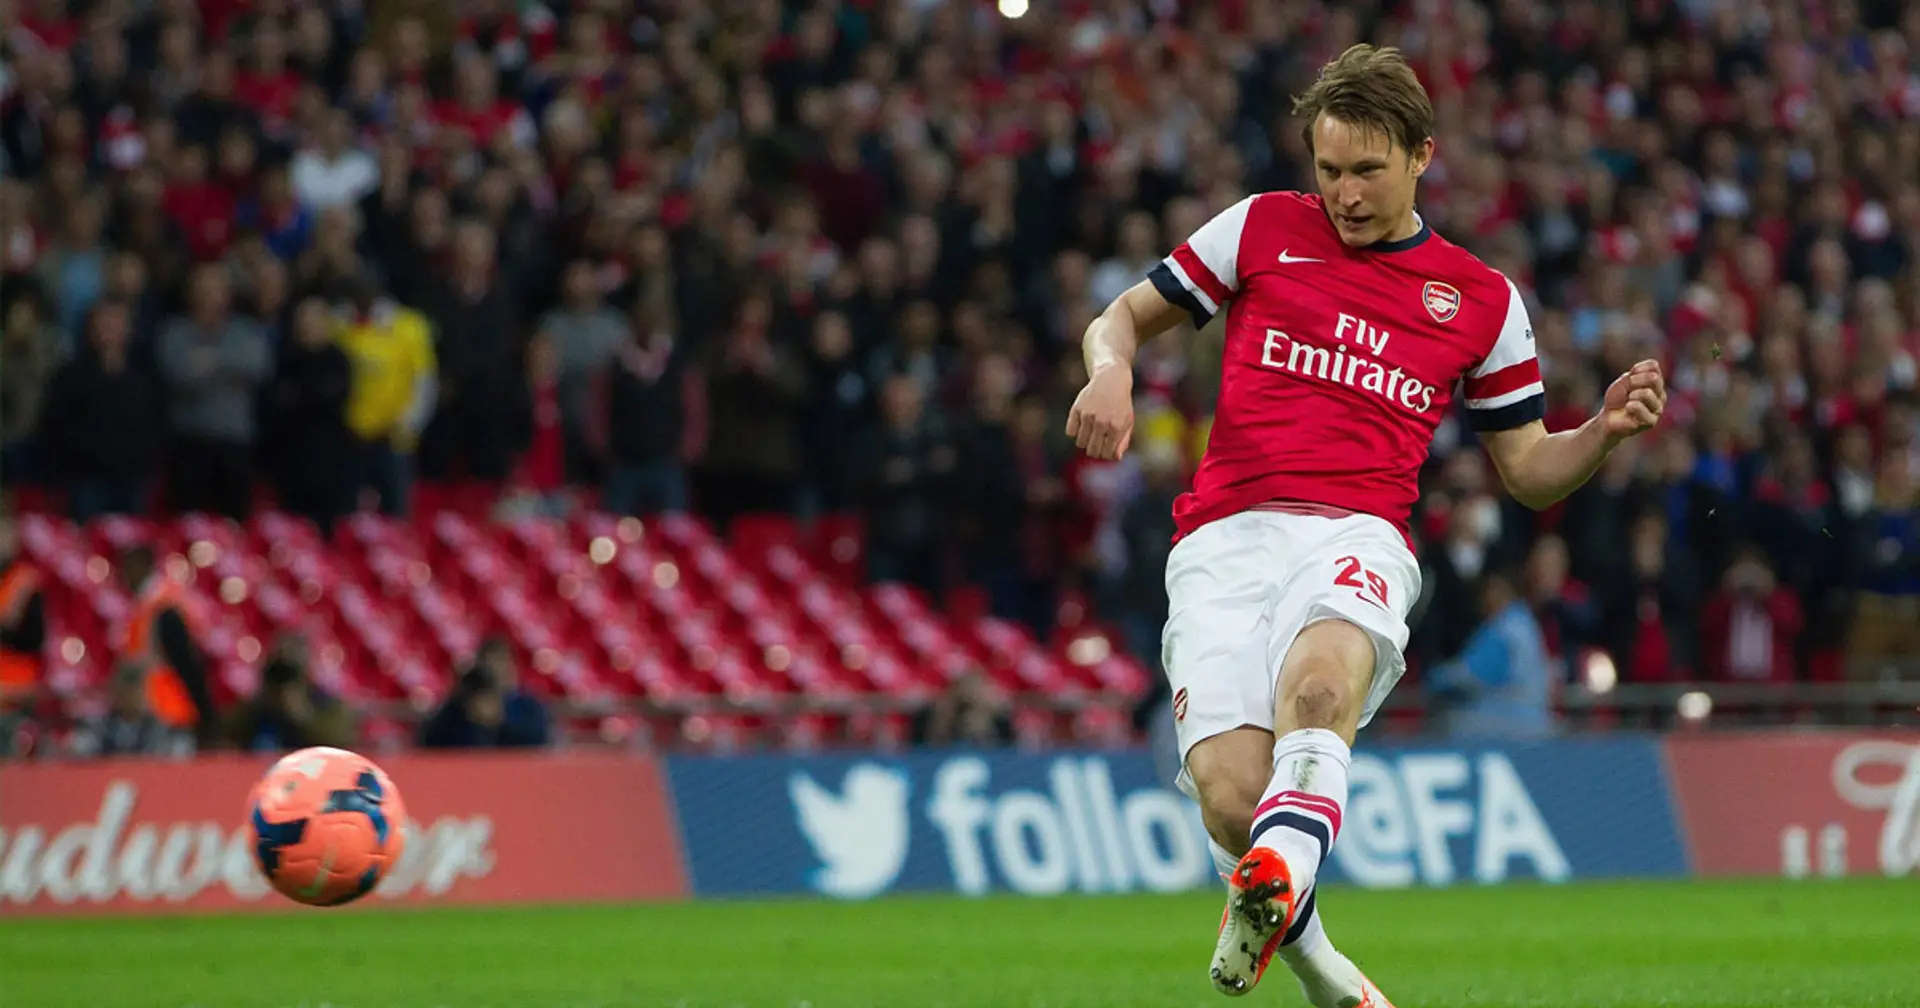 Kim Kallstrom perfectly sums up his time at Arsenal: 'I walked in, hit the penalty, we won a trophy and then I walked out again'